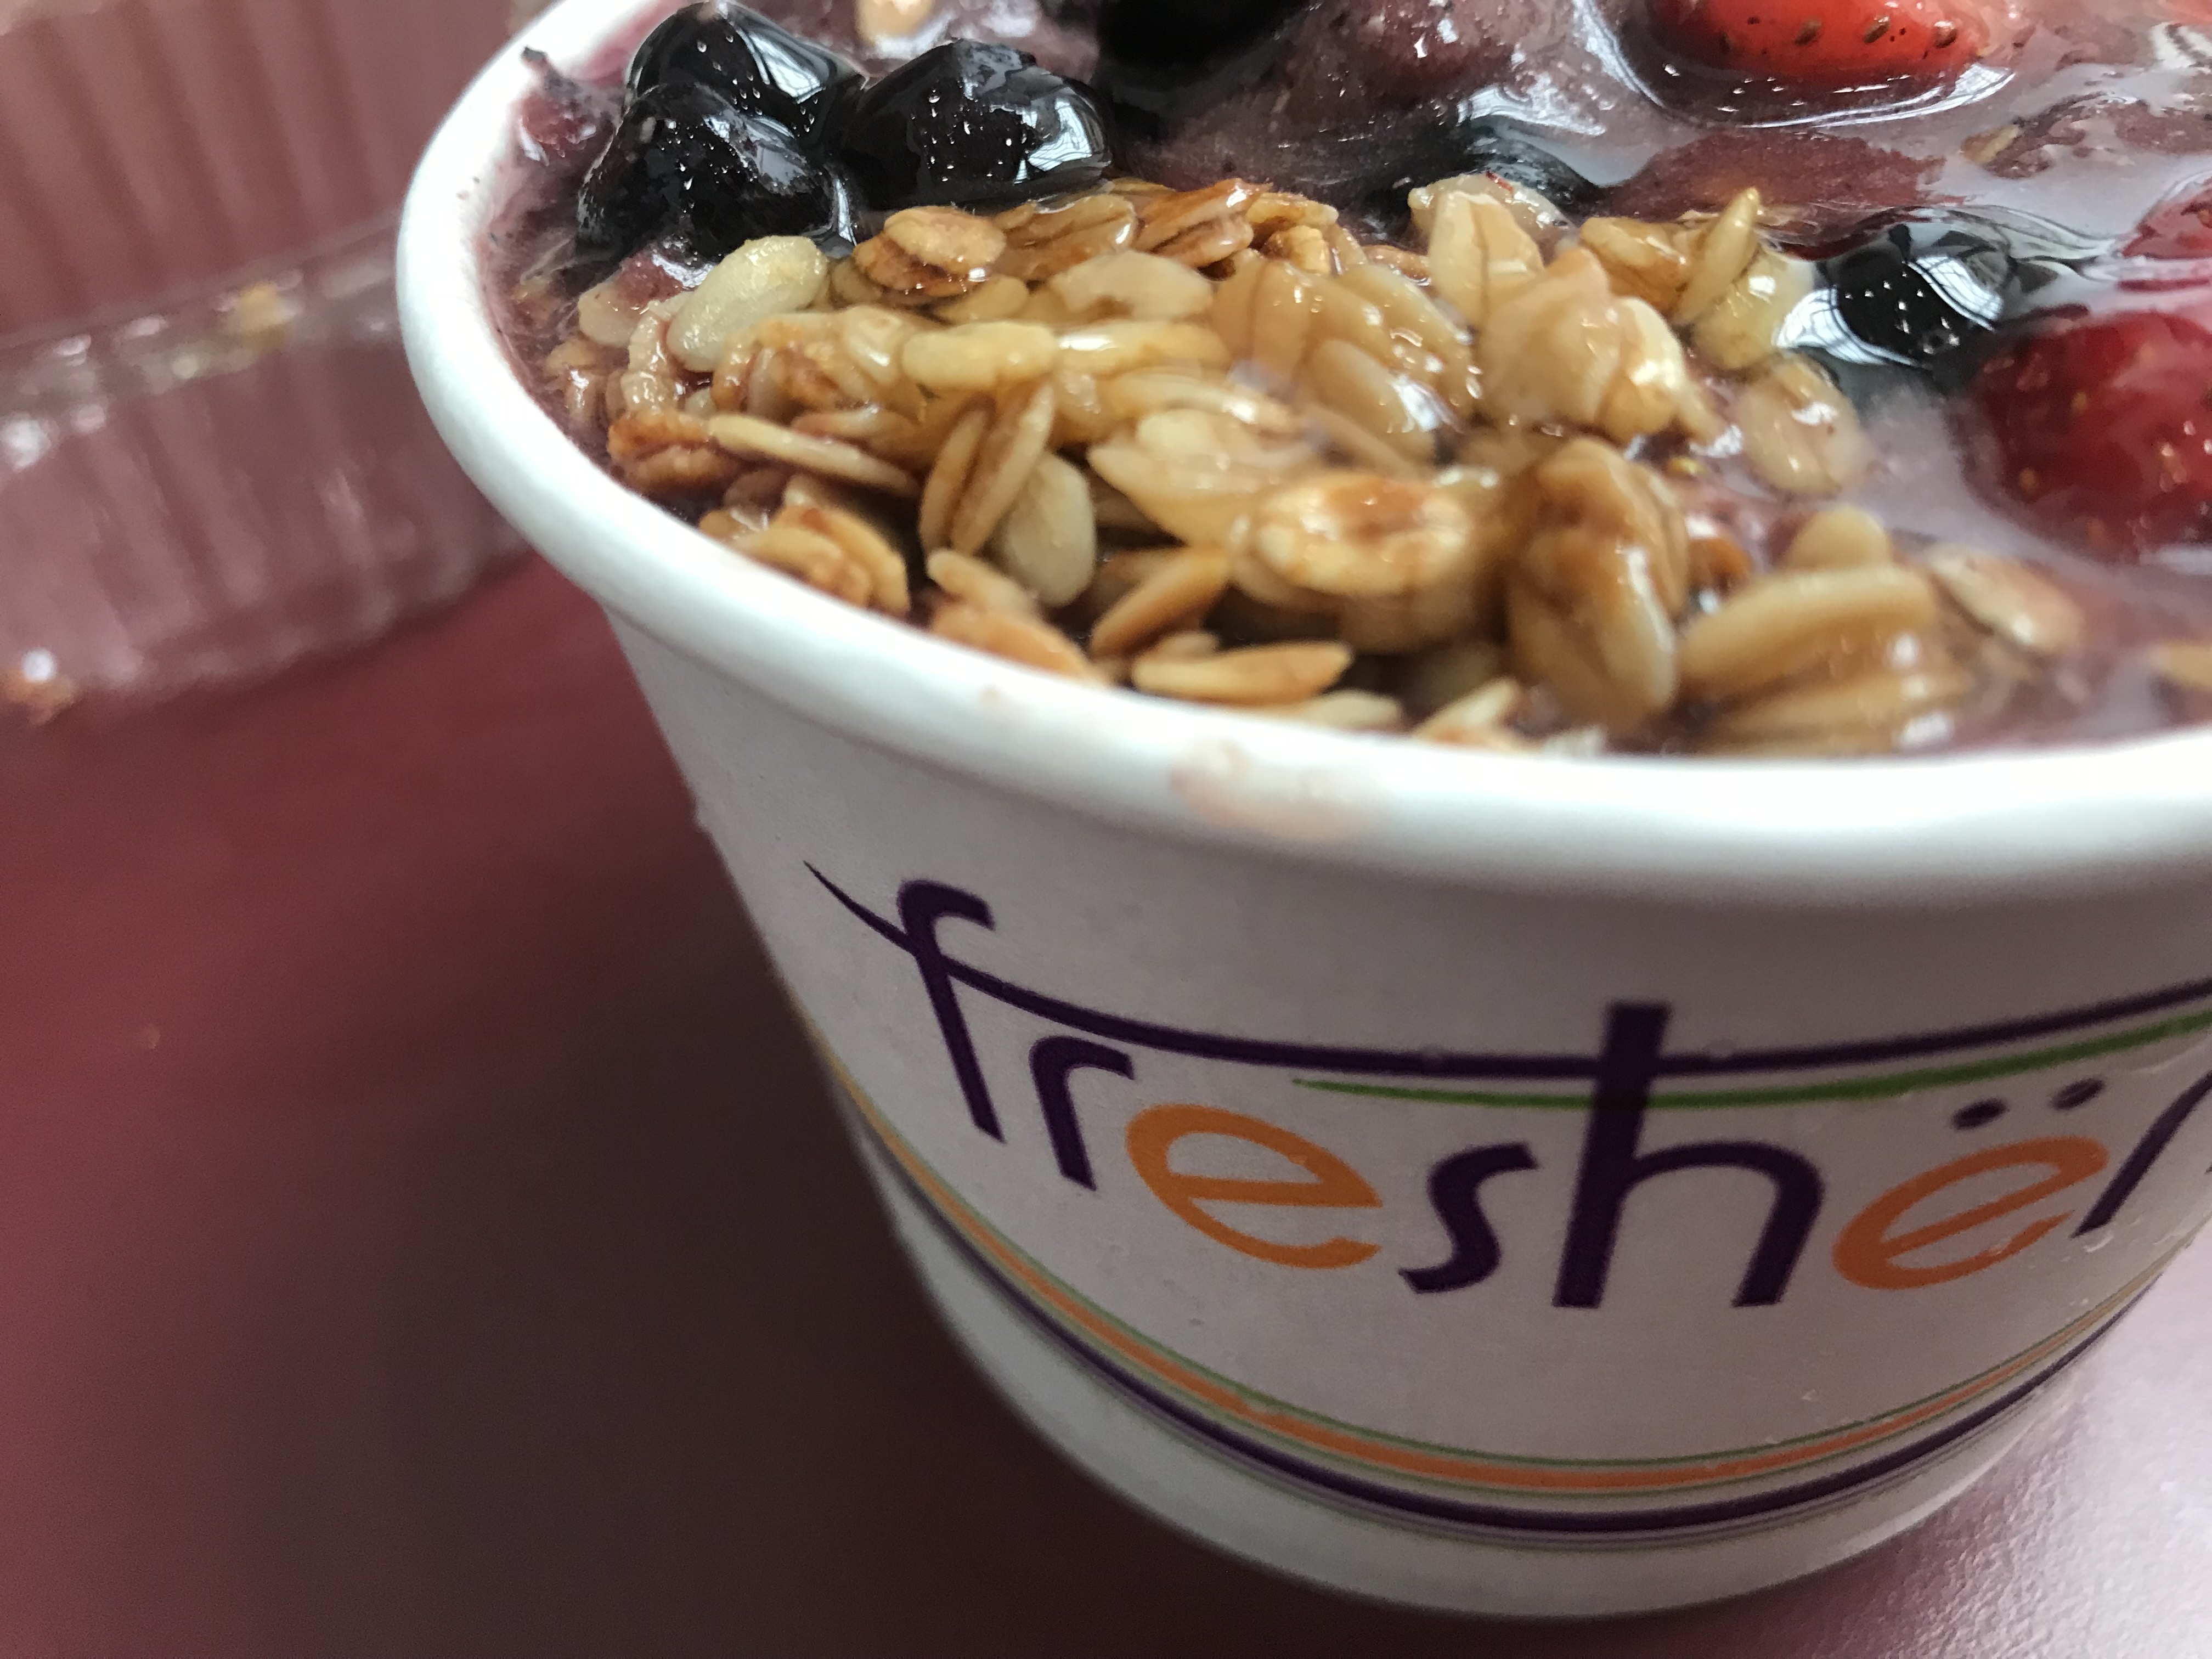 A yogurt bowl with fruit and oats from Freshens.